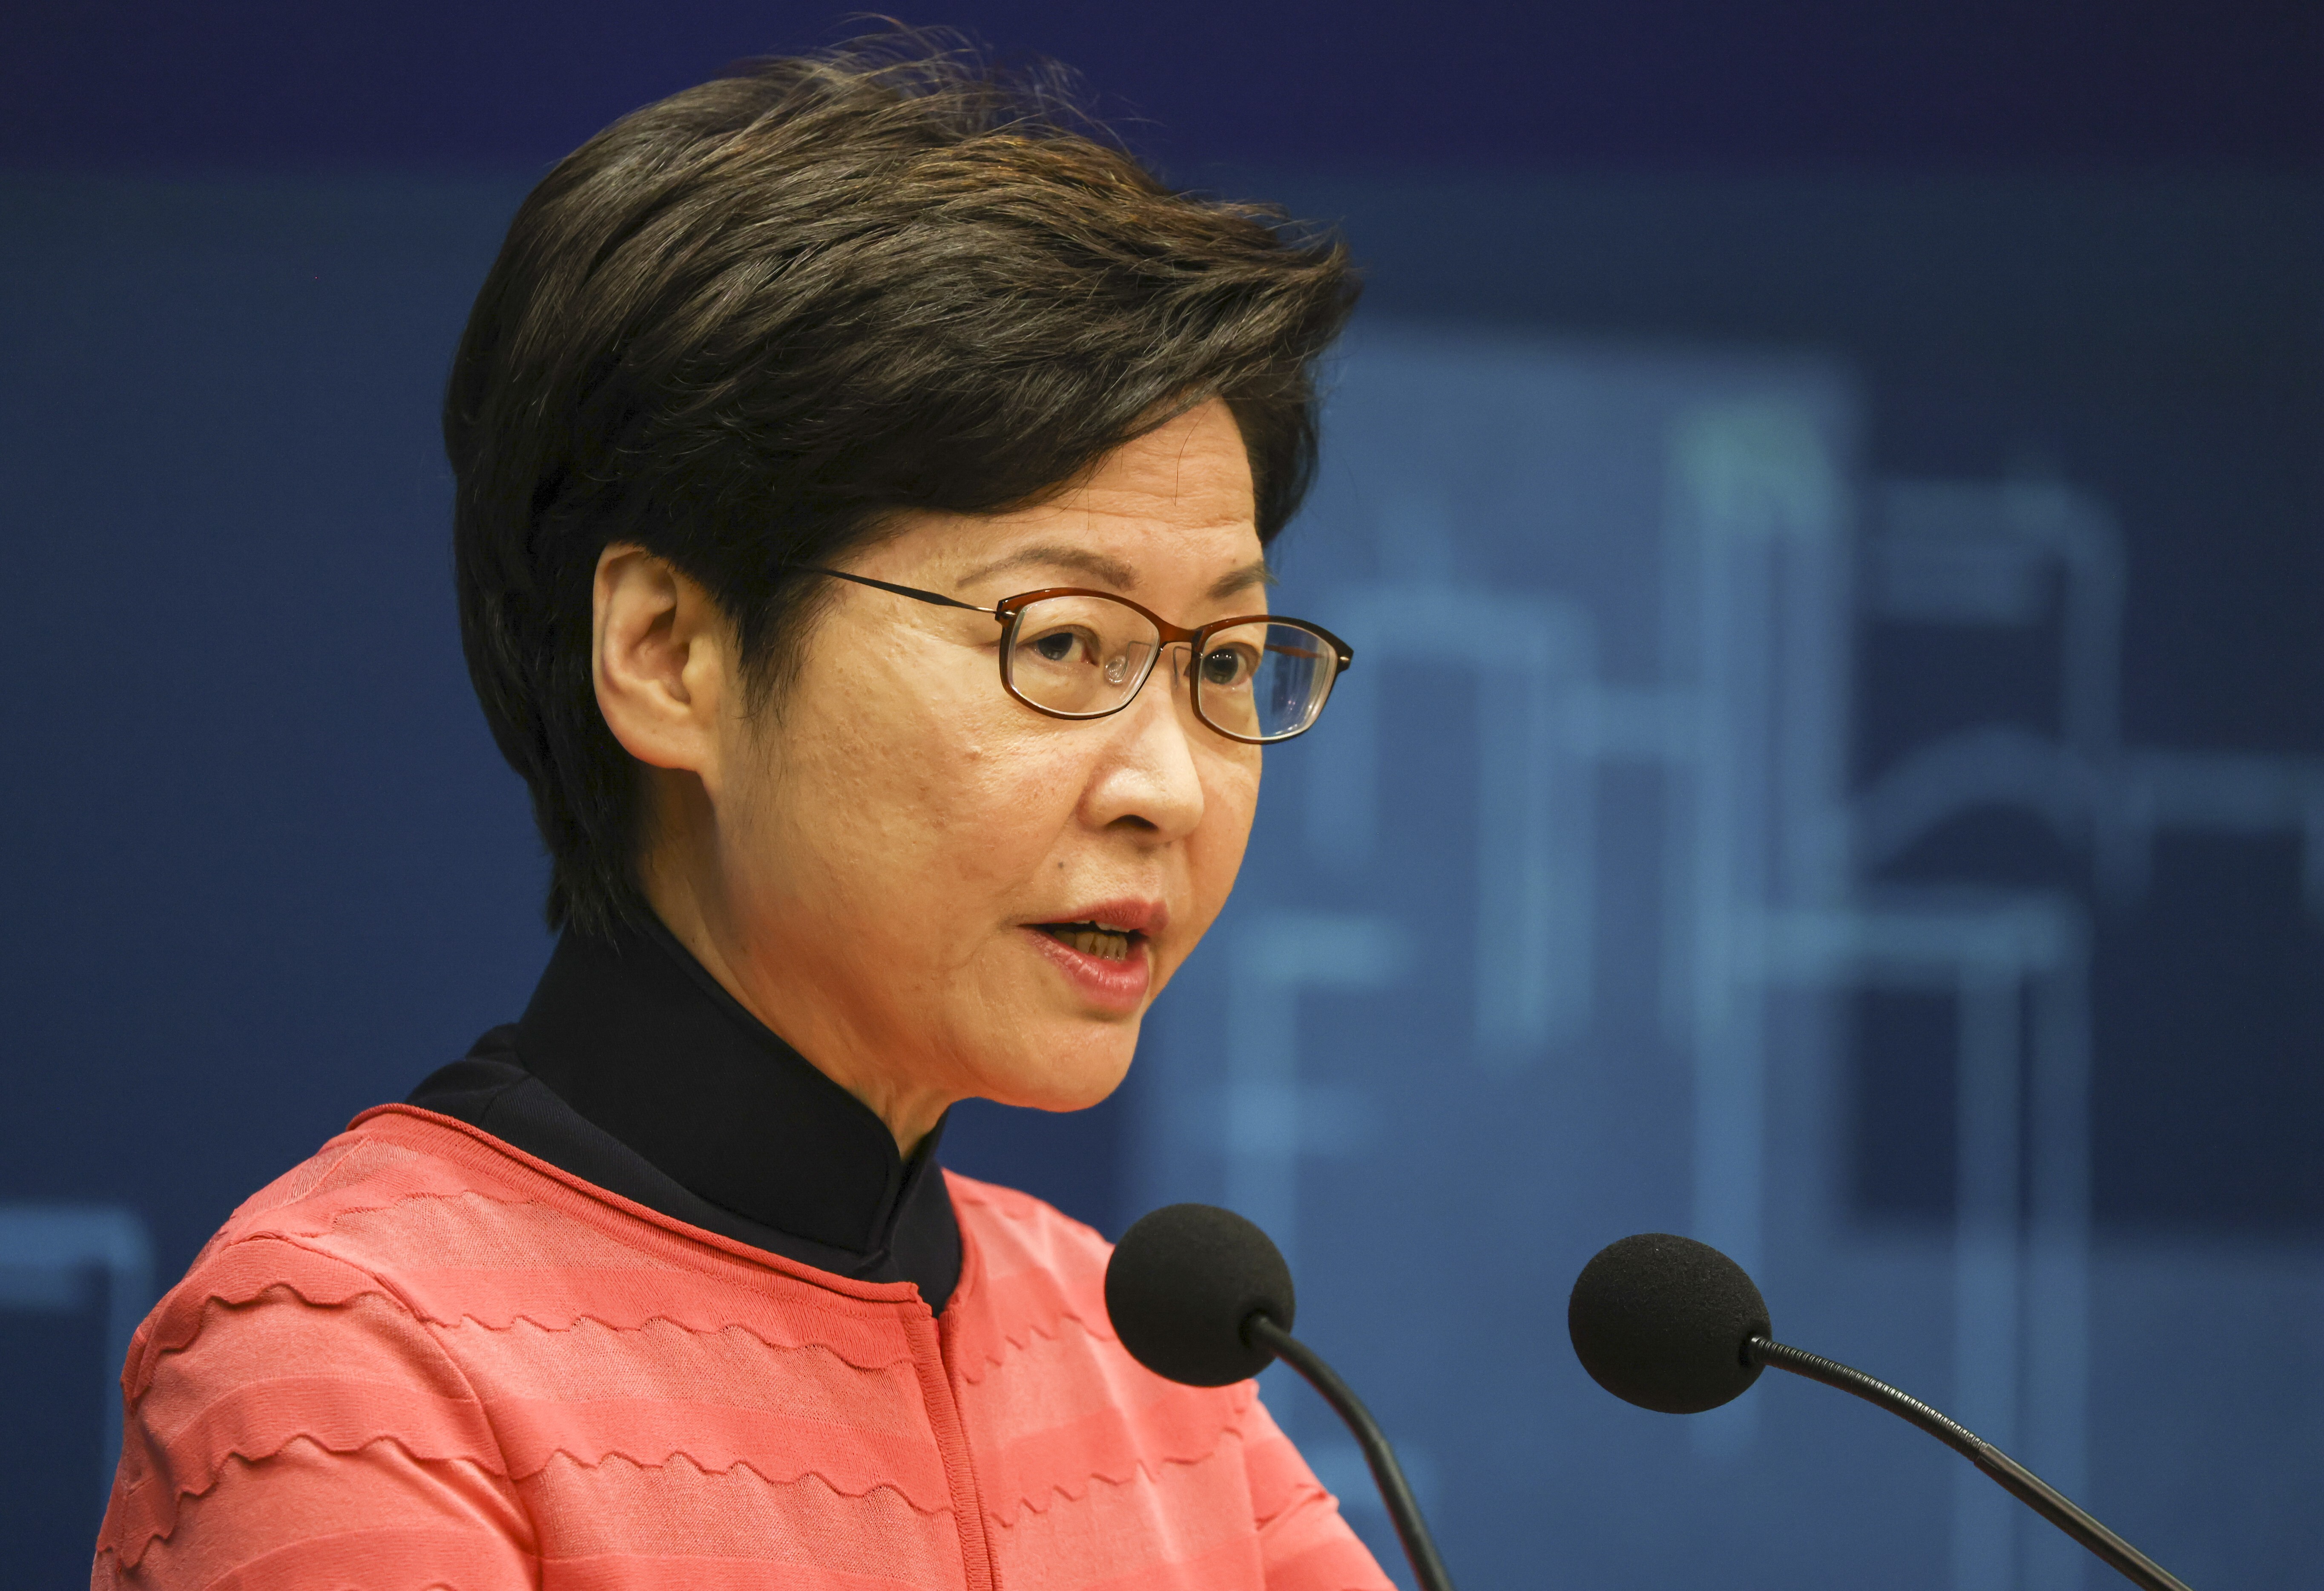 Hong Kong Chief Executive Carrie Lam has defended the strength of the city’s disclosure requirements for senior public officials. Photo: Nora Tam